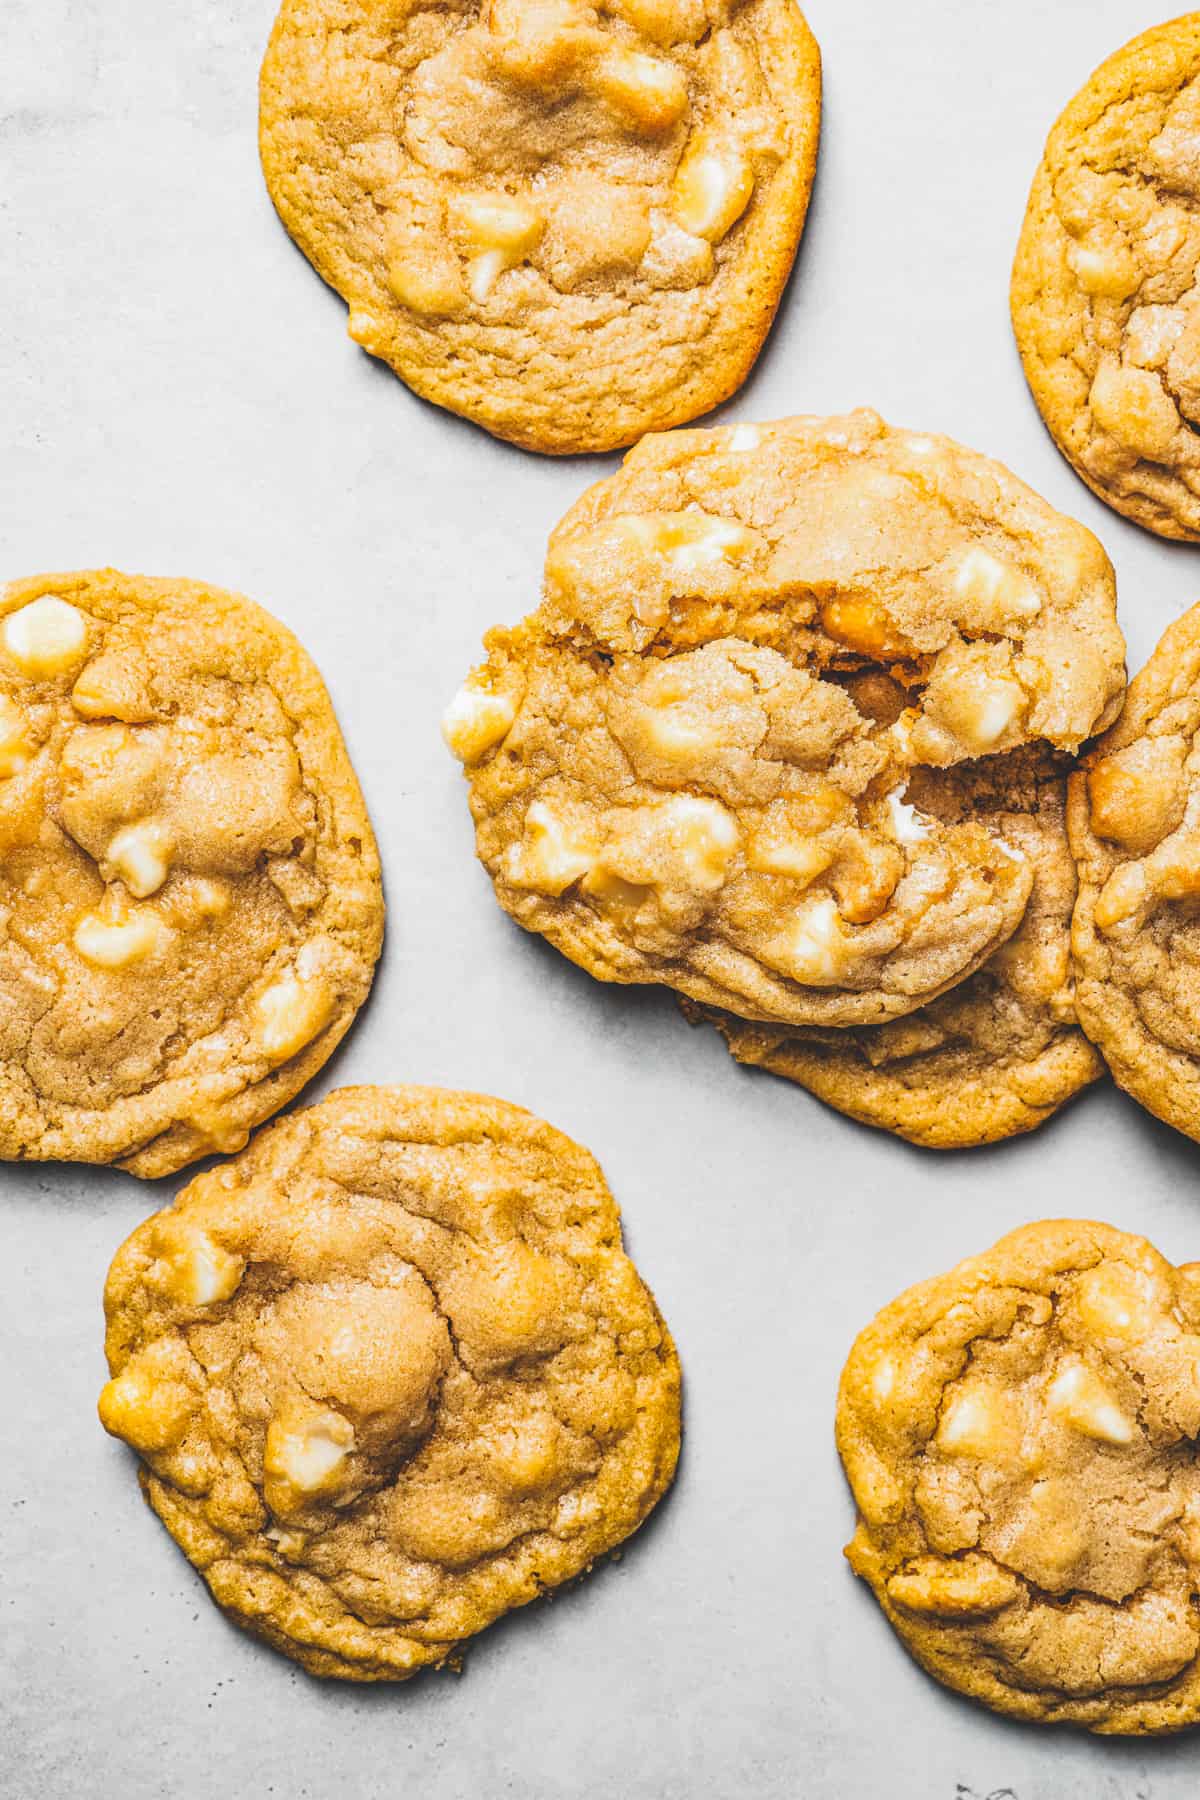 Overhead view of white chocolate chip cookies arranged on a white background.